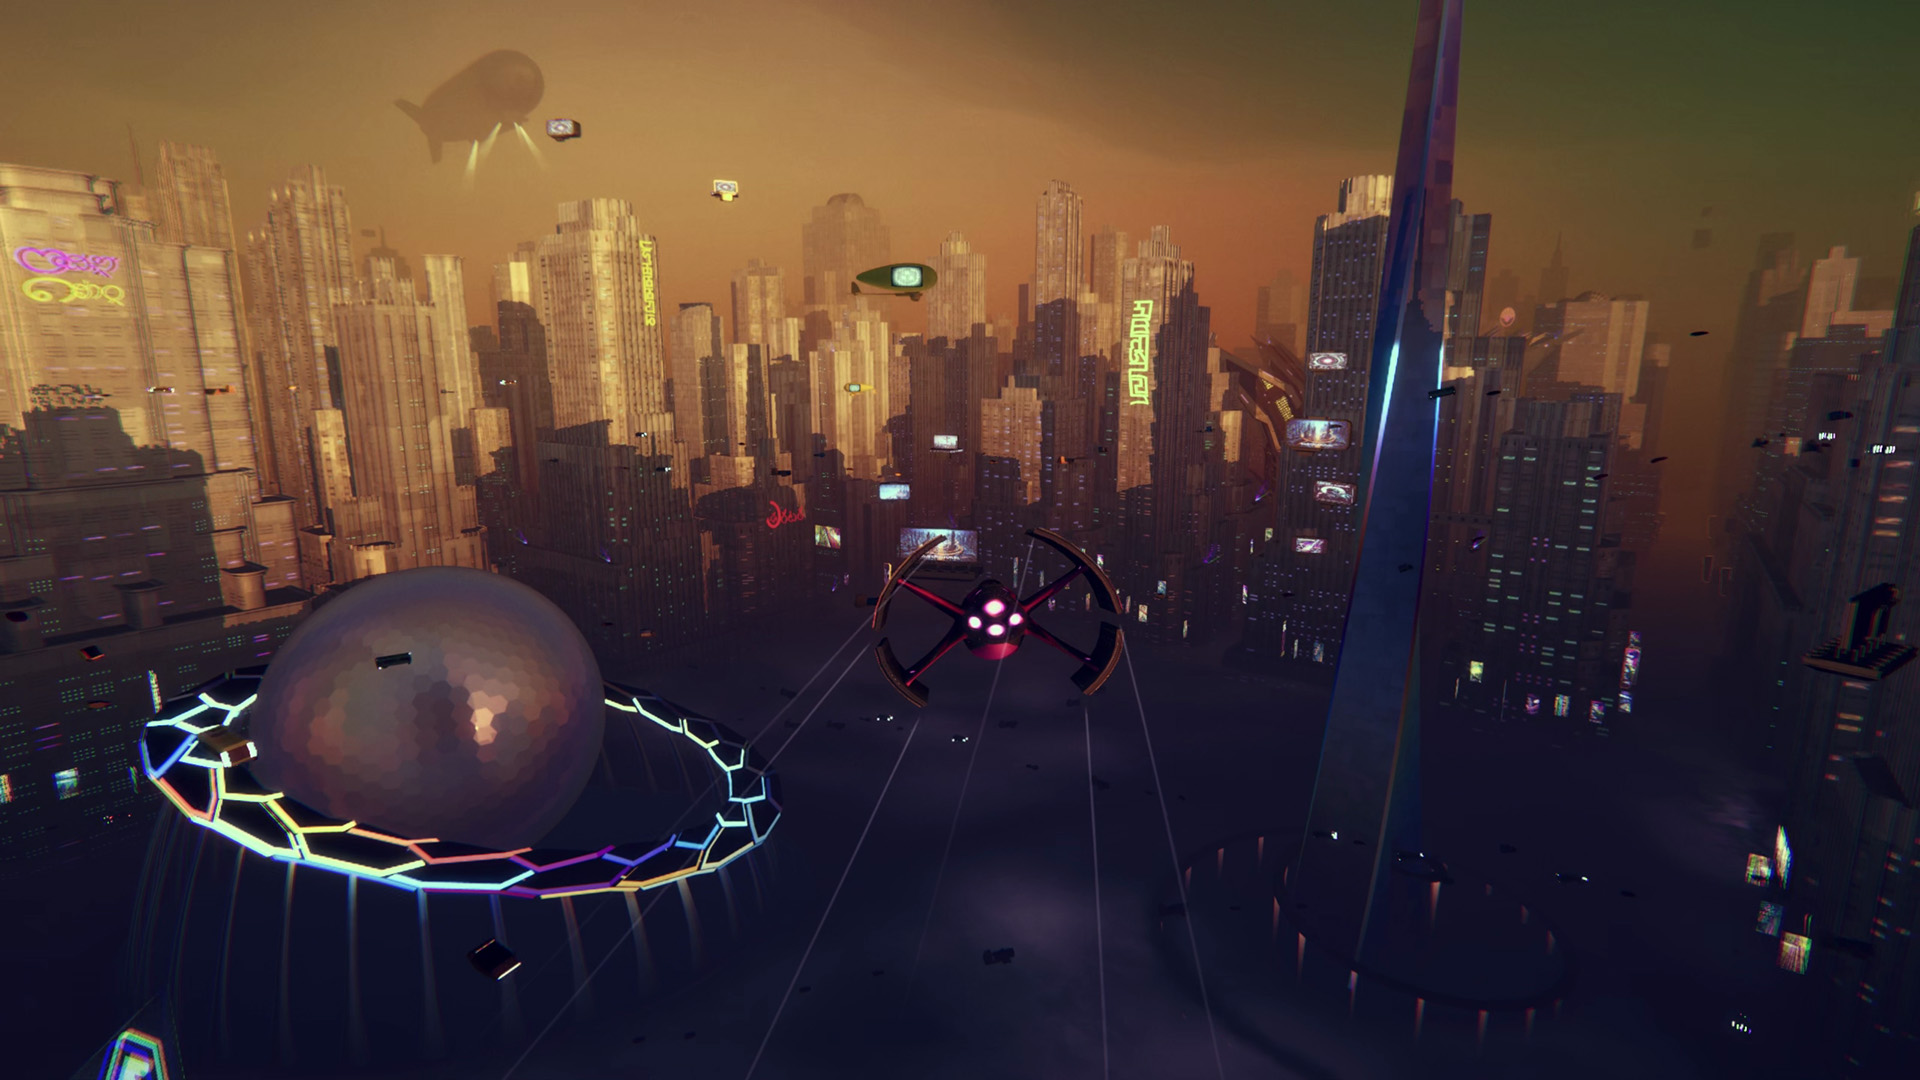 The Megacity Metro demo from Unity uses DOTS 